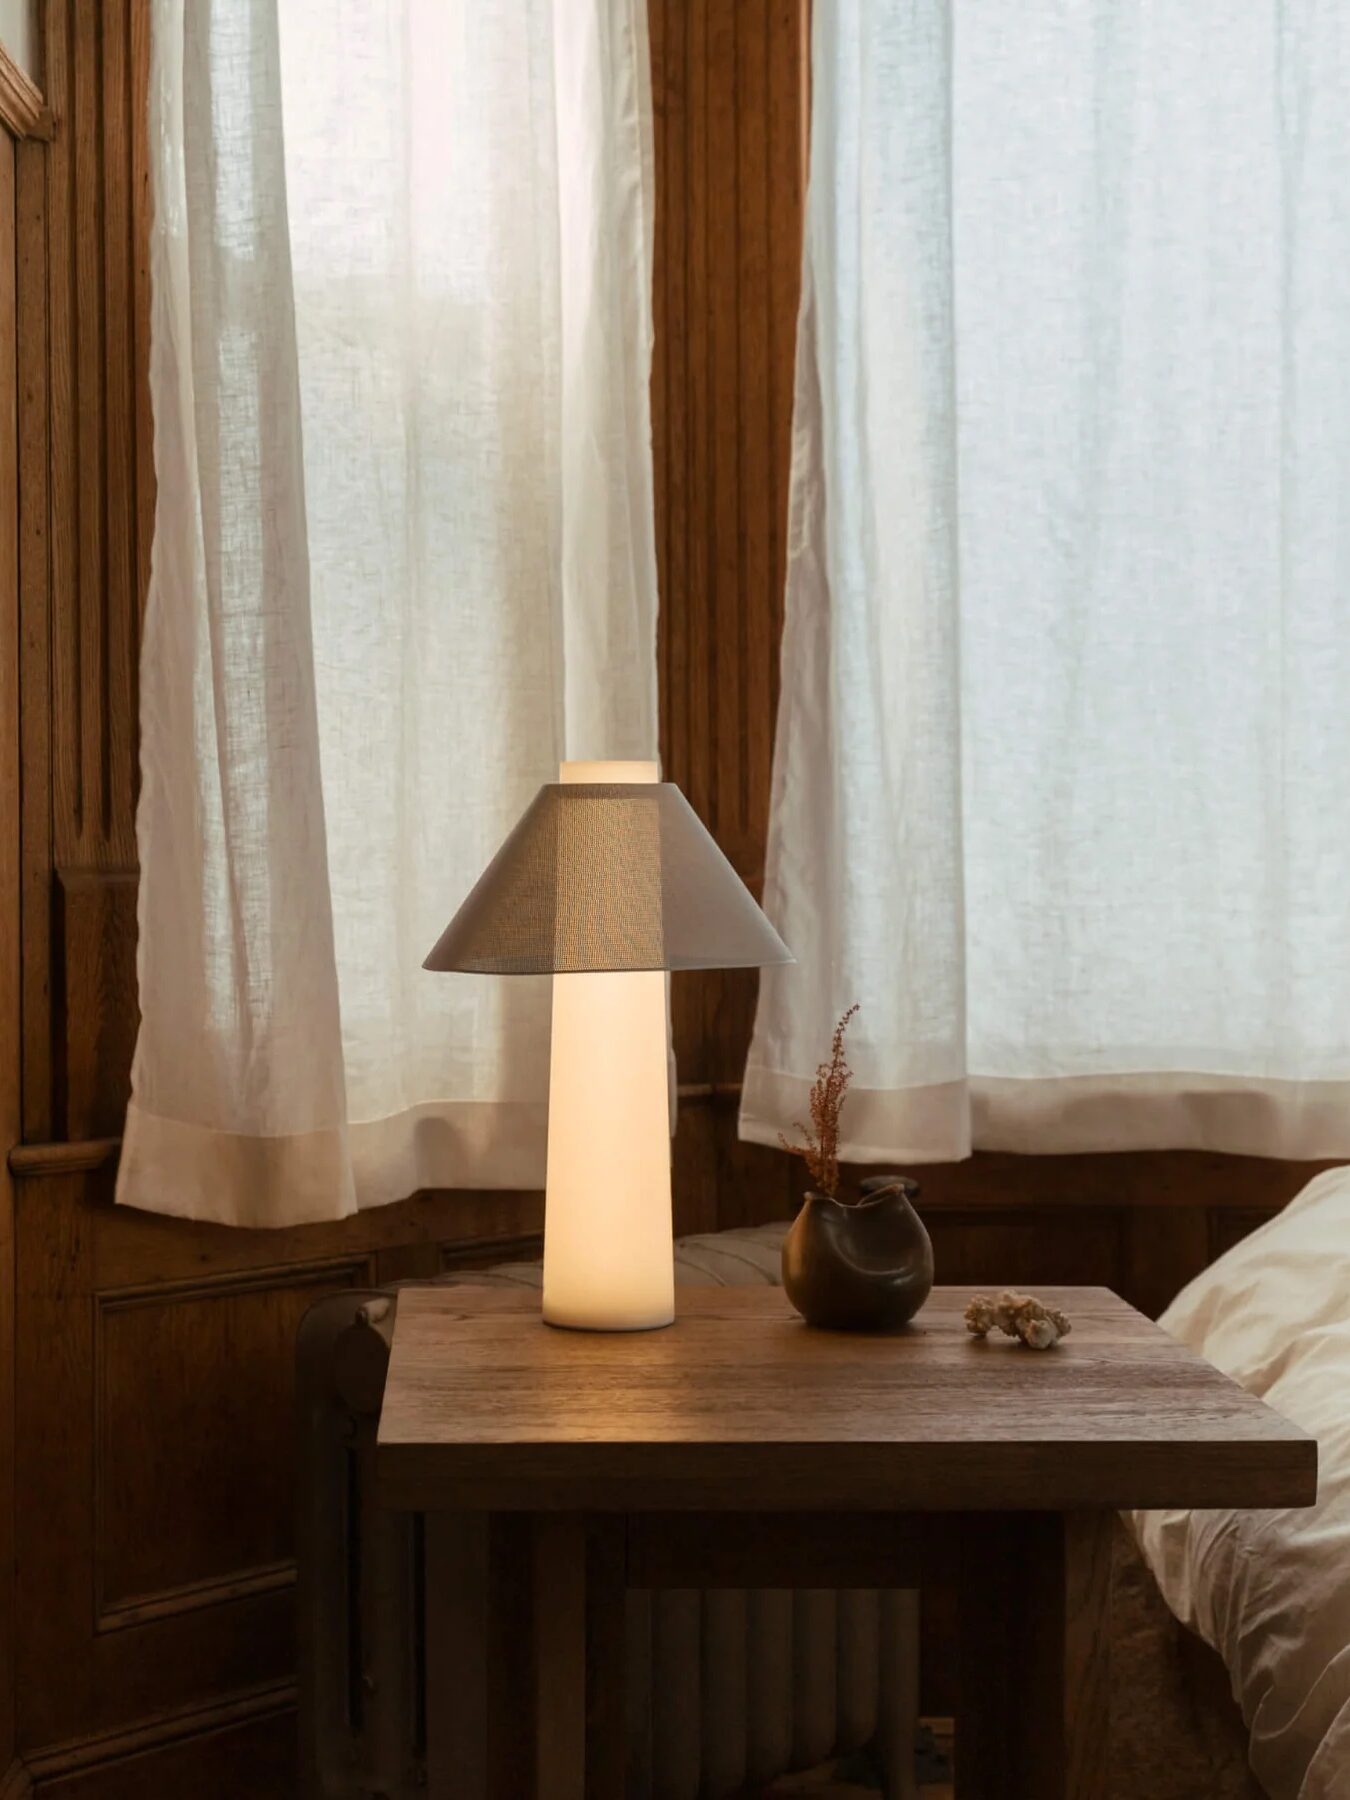 Loftie lamp sits on a bedside table with its base lit.